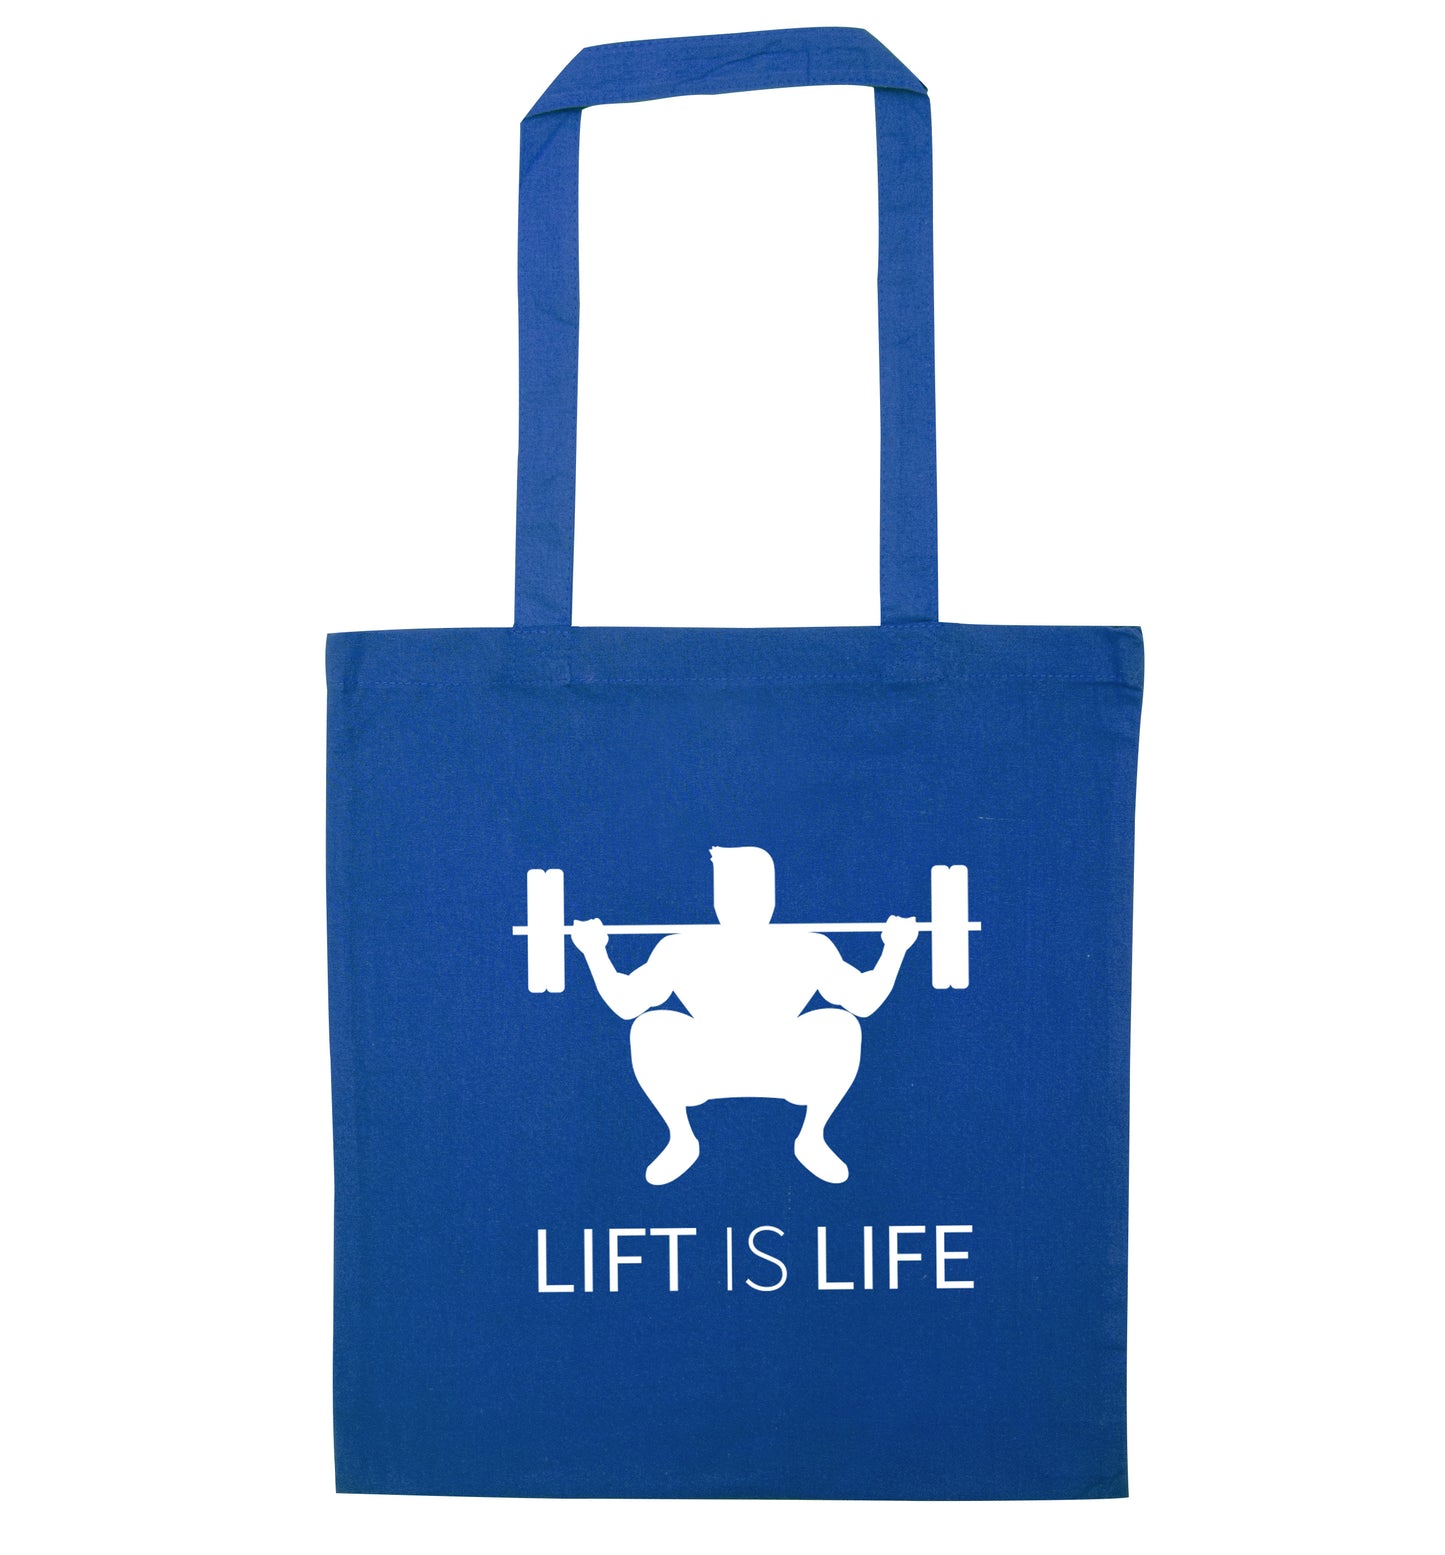 Lift is life blue tote bag